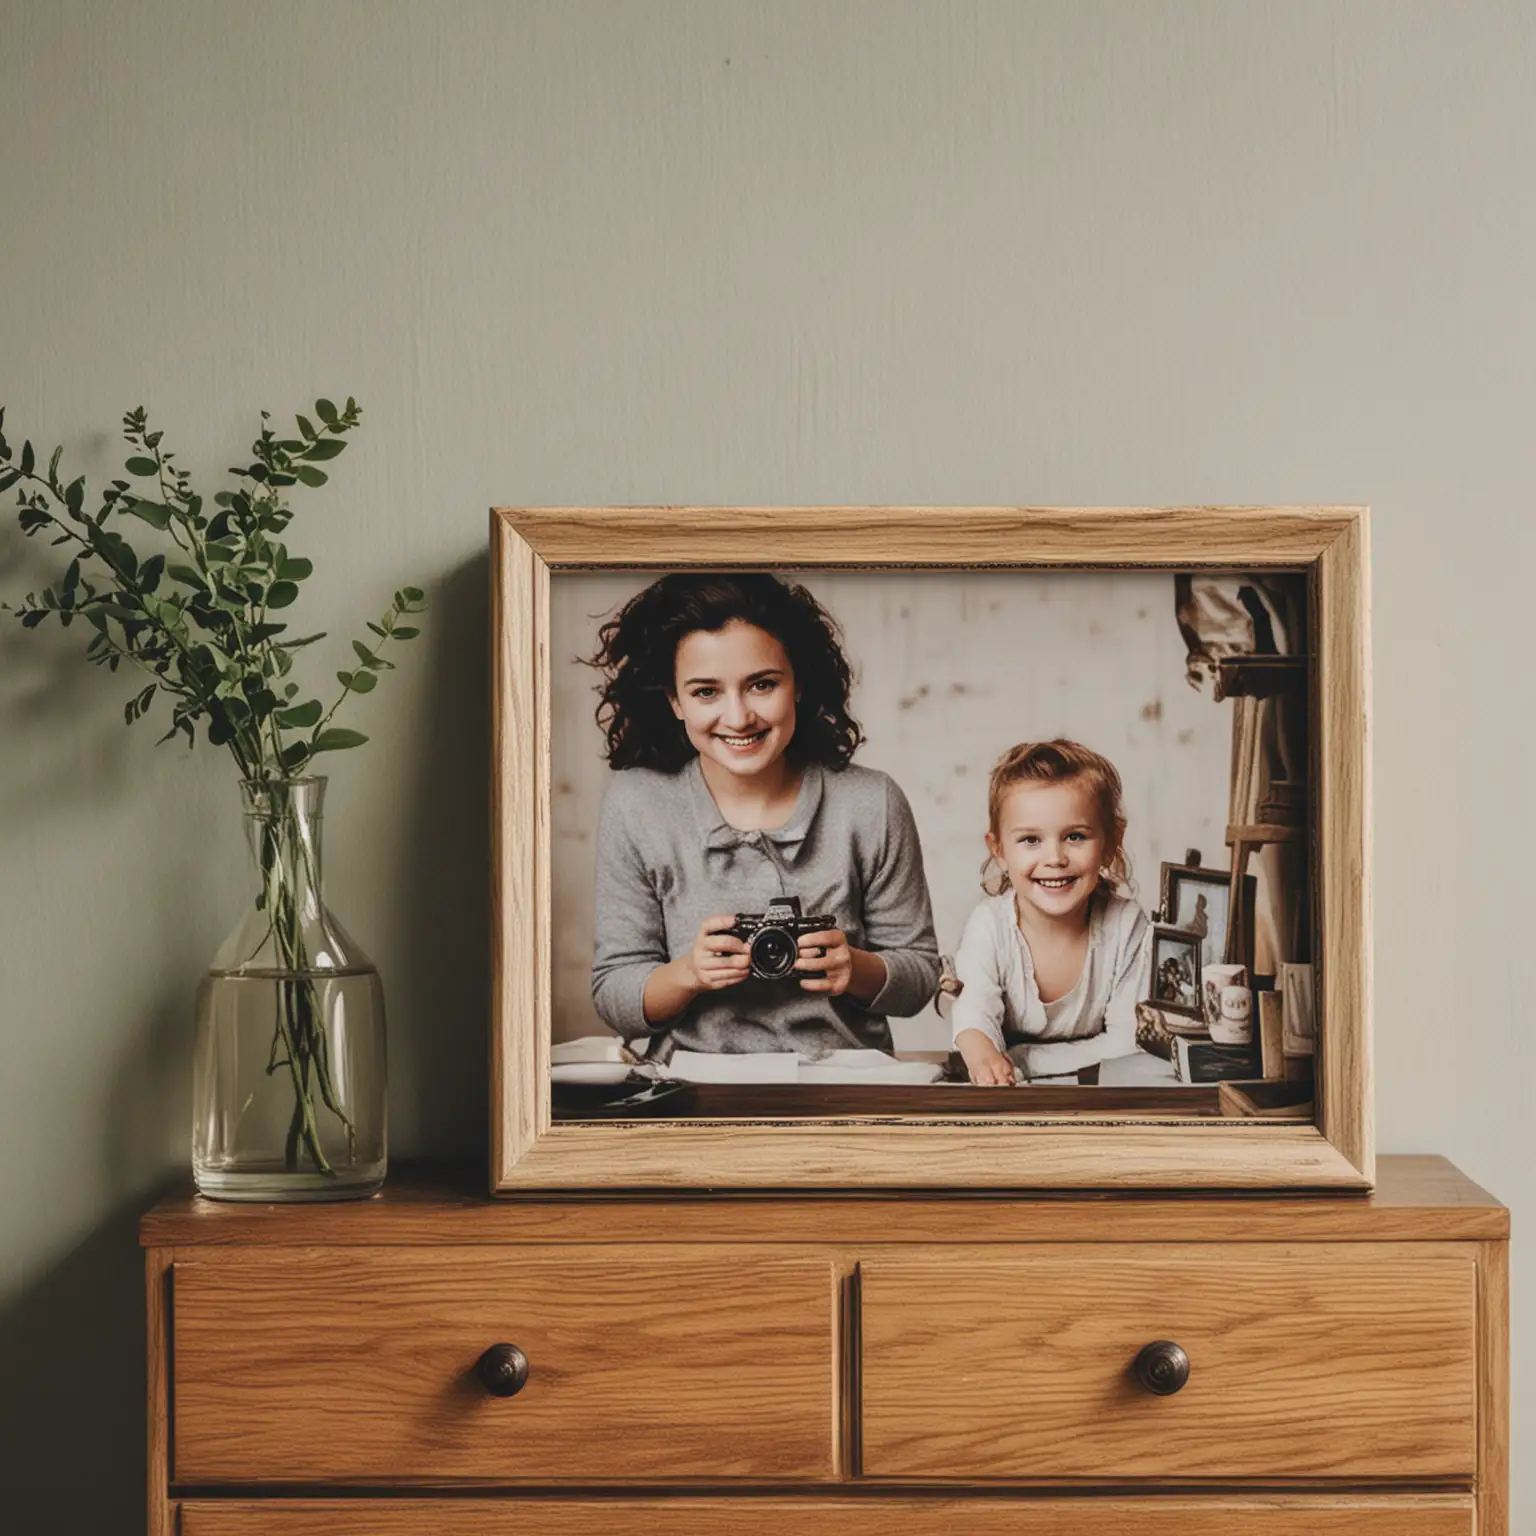 generate a photo about a photo frame on a dresser